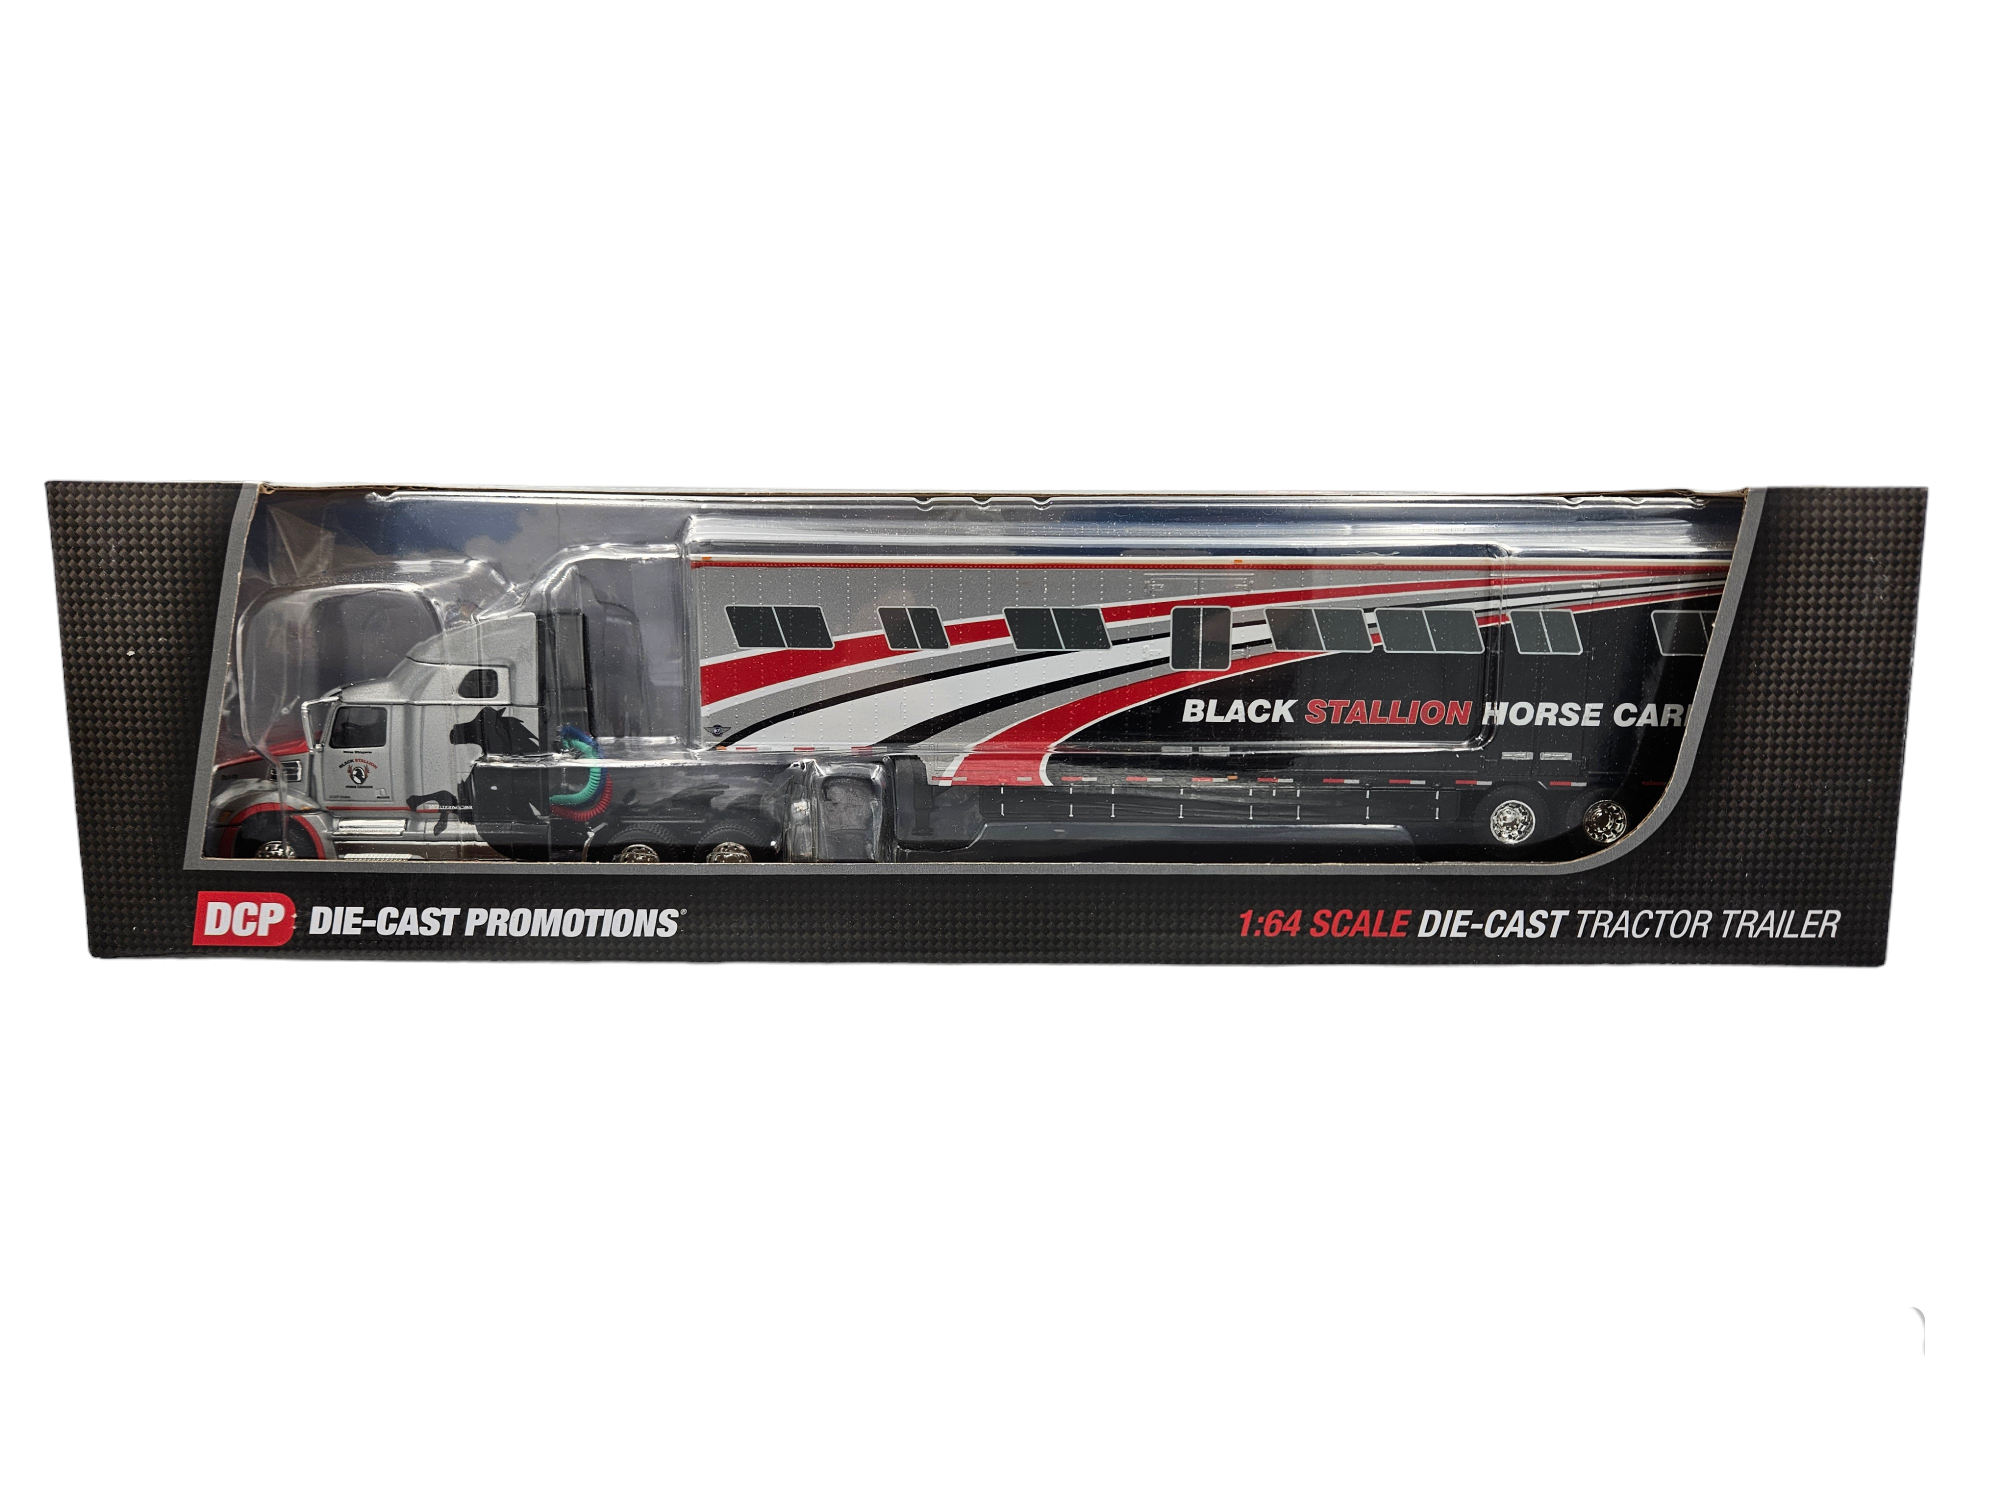 BLACK STALLION, WESTERN STAR 5700XE HIGH ROOF TRUCK W/KENTUCKY MOVING TRAILER by DCP 1//64